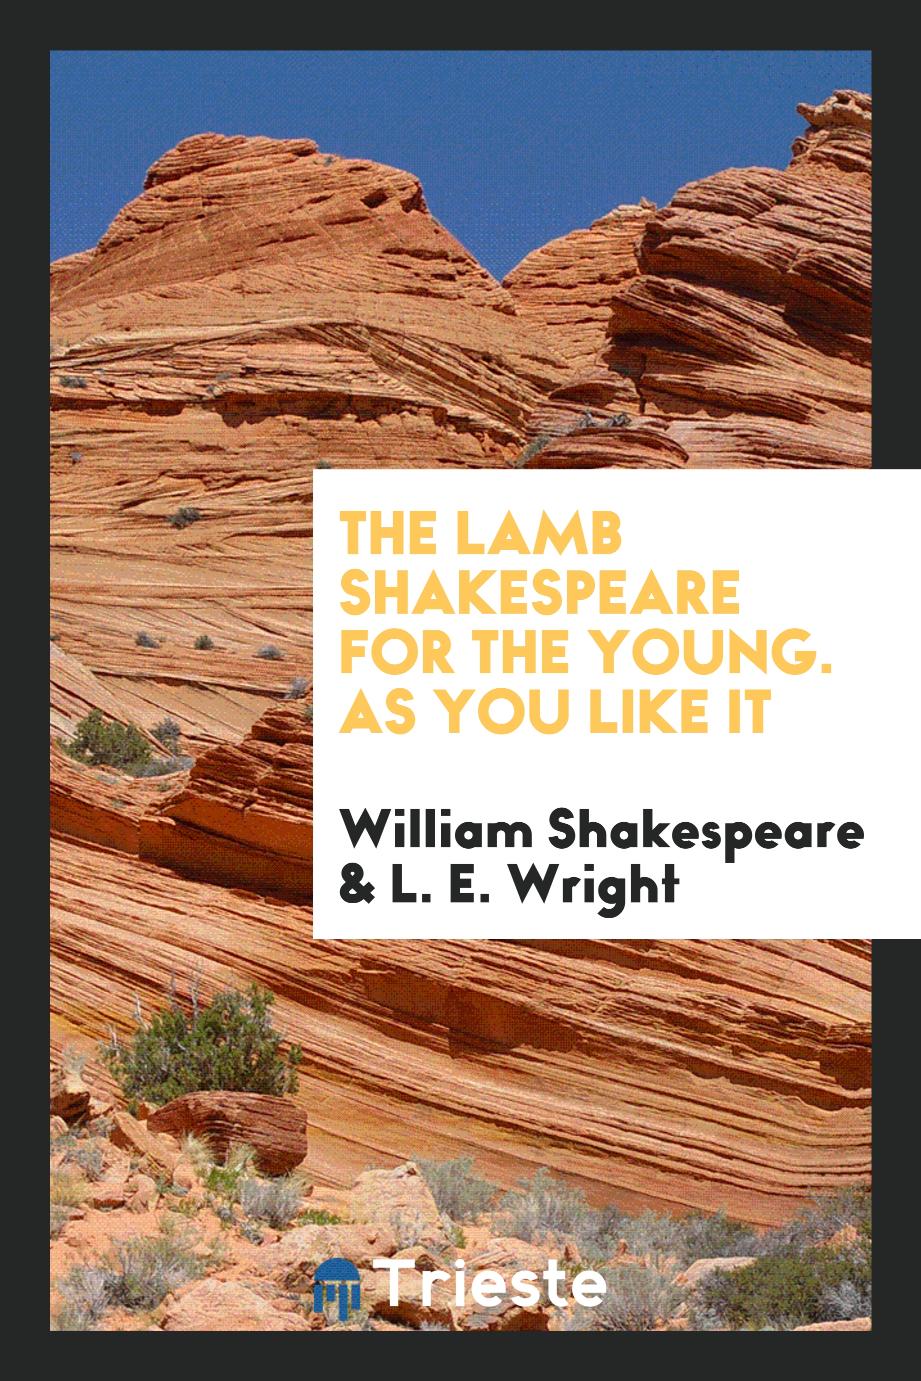 The Lamb Shakespeare for the Young. As You Like It